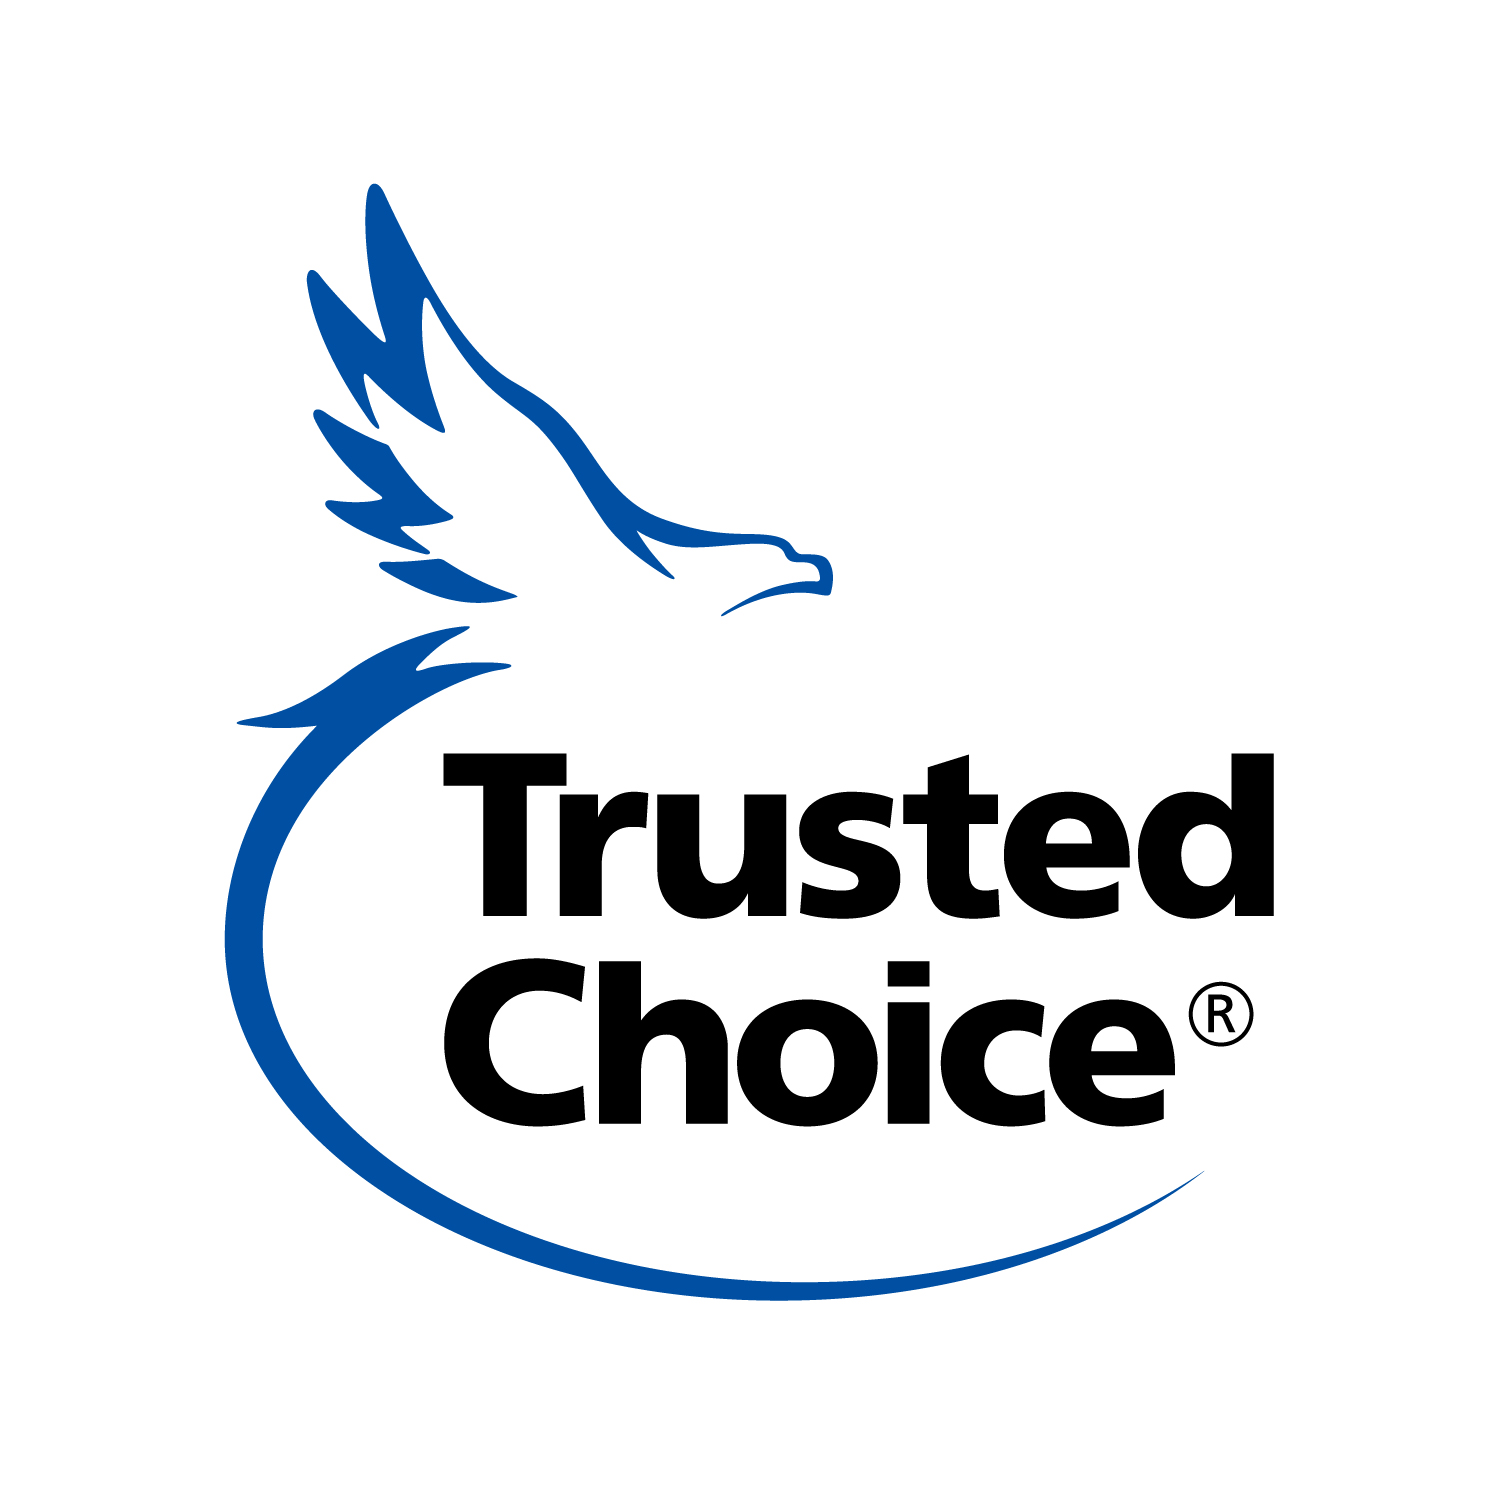 Trusted Choice